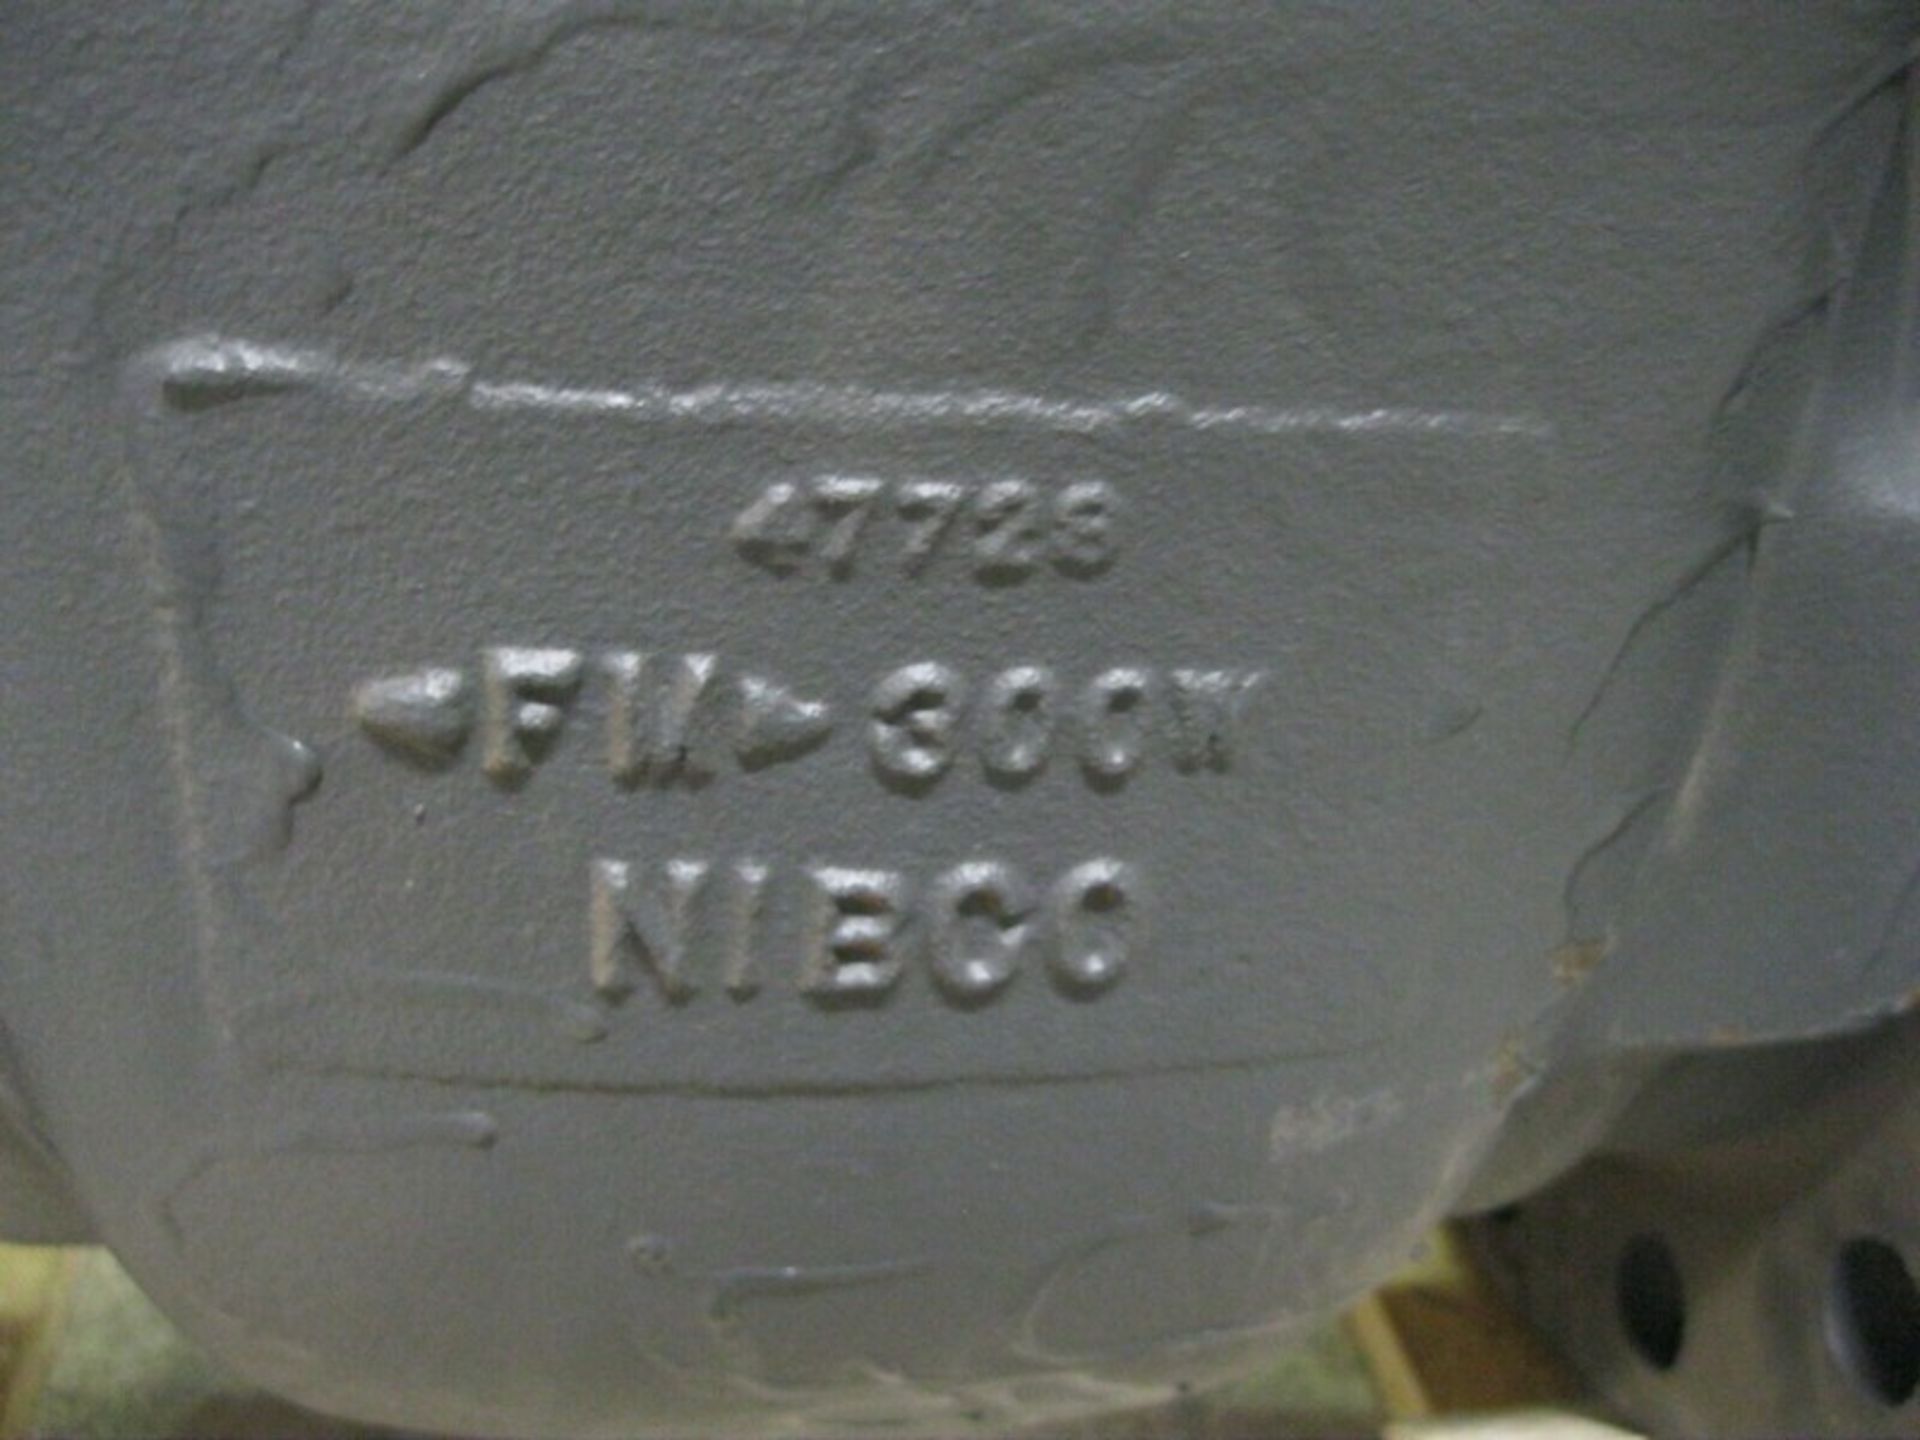 10" Flanged 300/350 PSI WWP Nibco F-697-0 Fire Main Gate Valve NEW (Loading Fee $50) (Located - Image 5 of 5